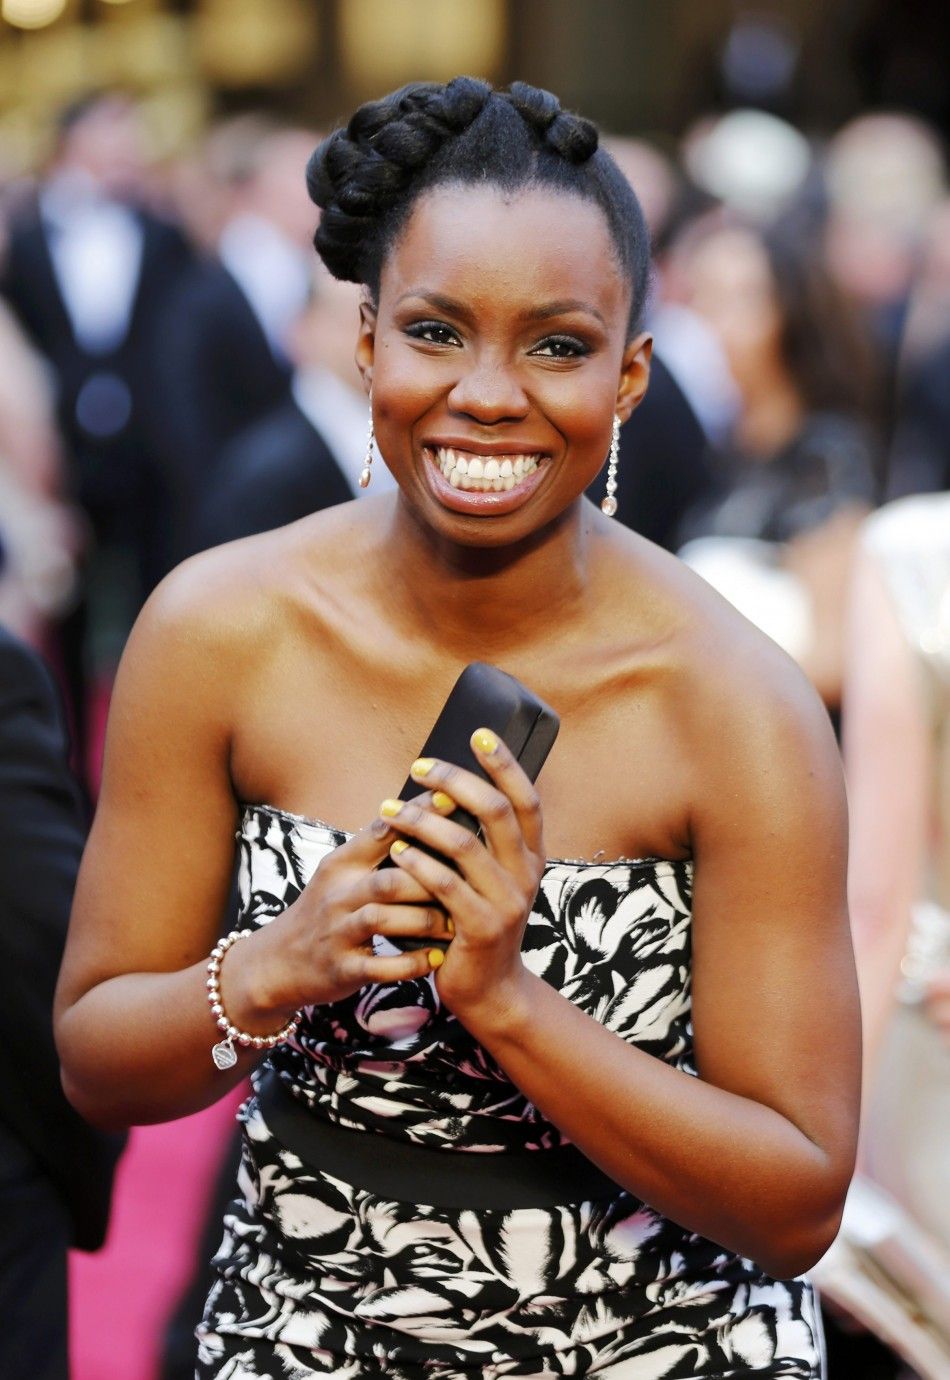 Actress Oduye from quot12 Years a Slavequot arrives at the 86th Academy Awards in Hollywood